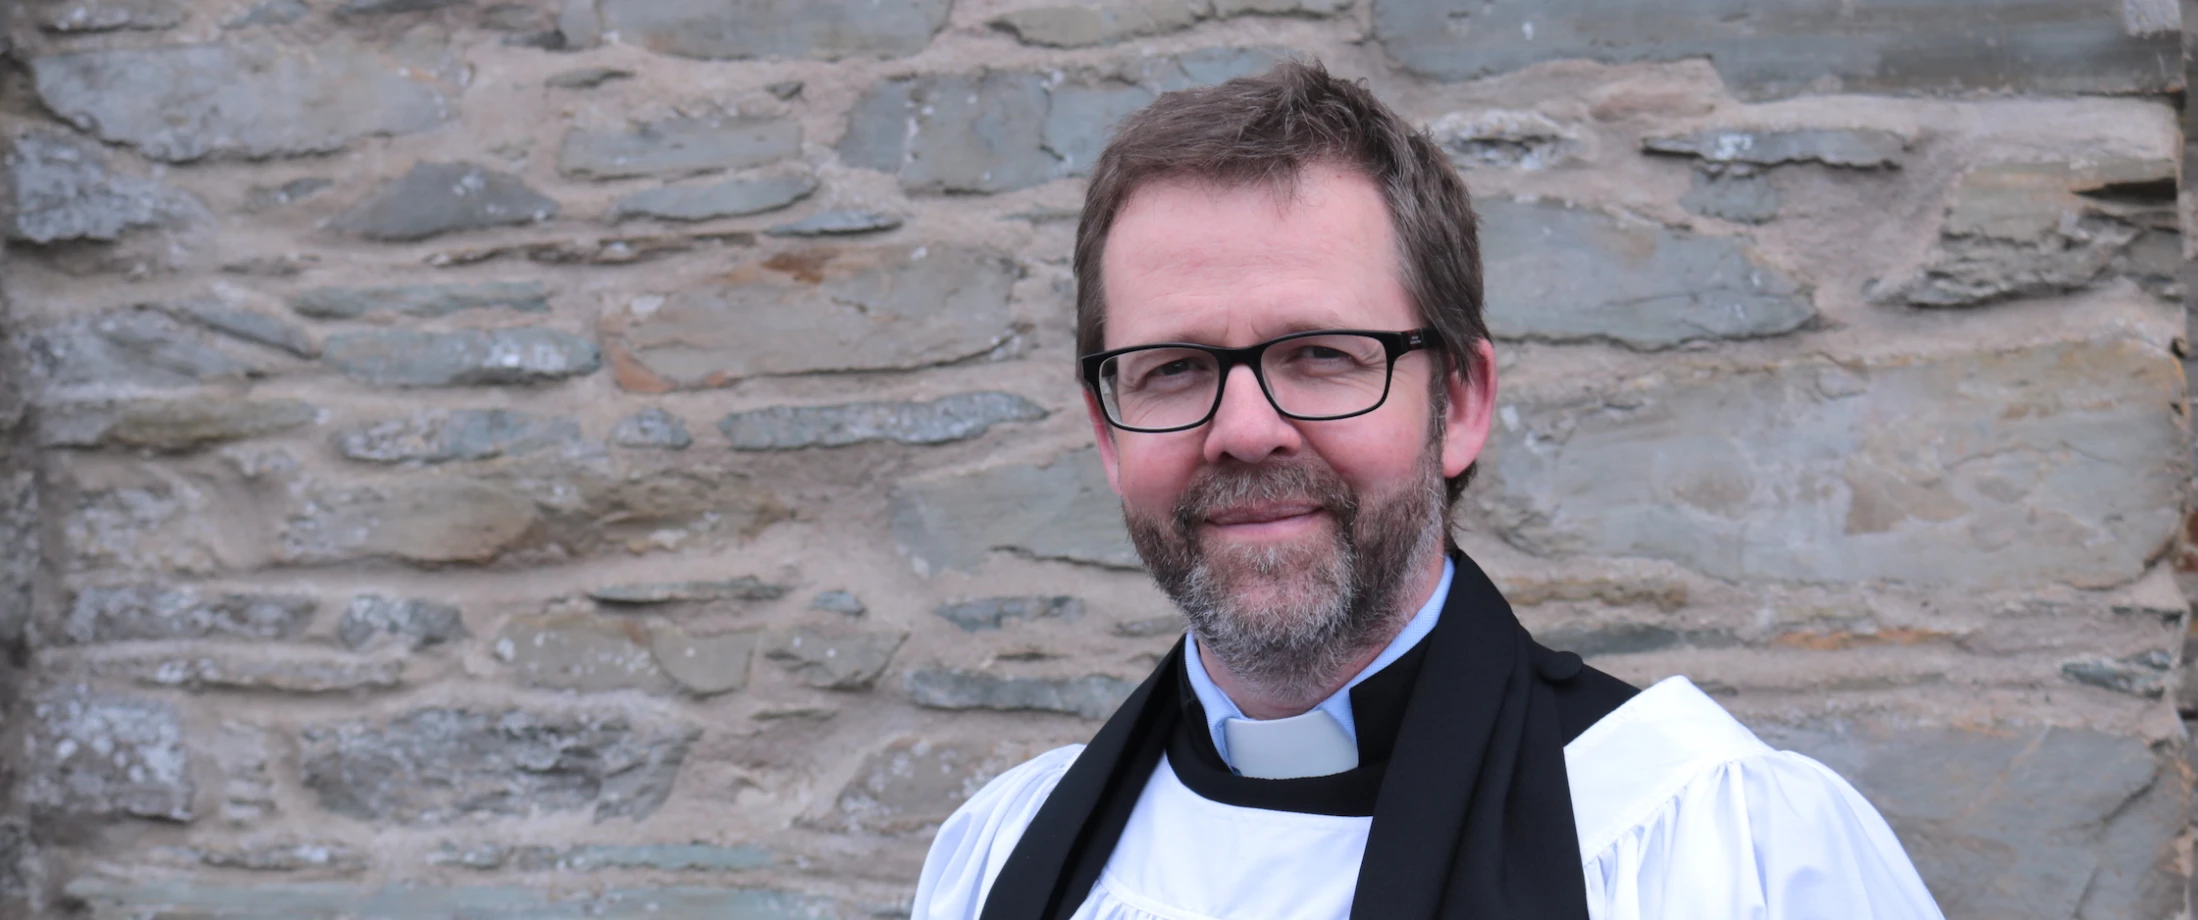 Andy Hay is ordained deacon